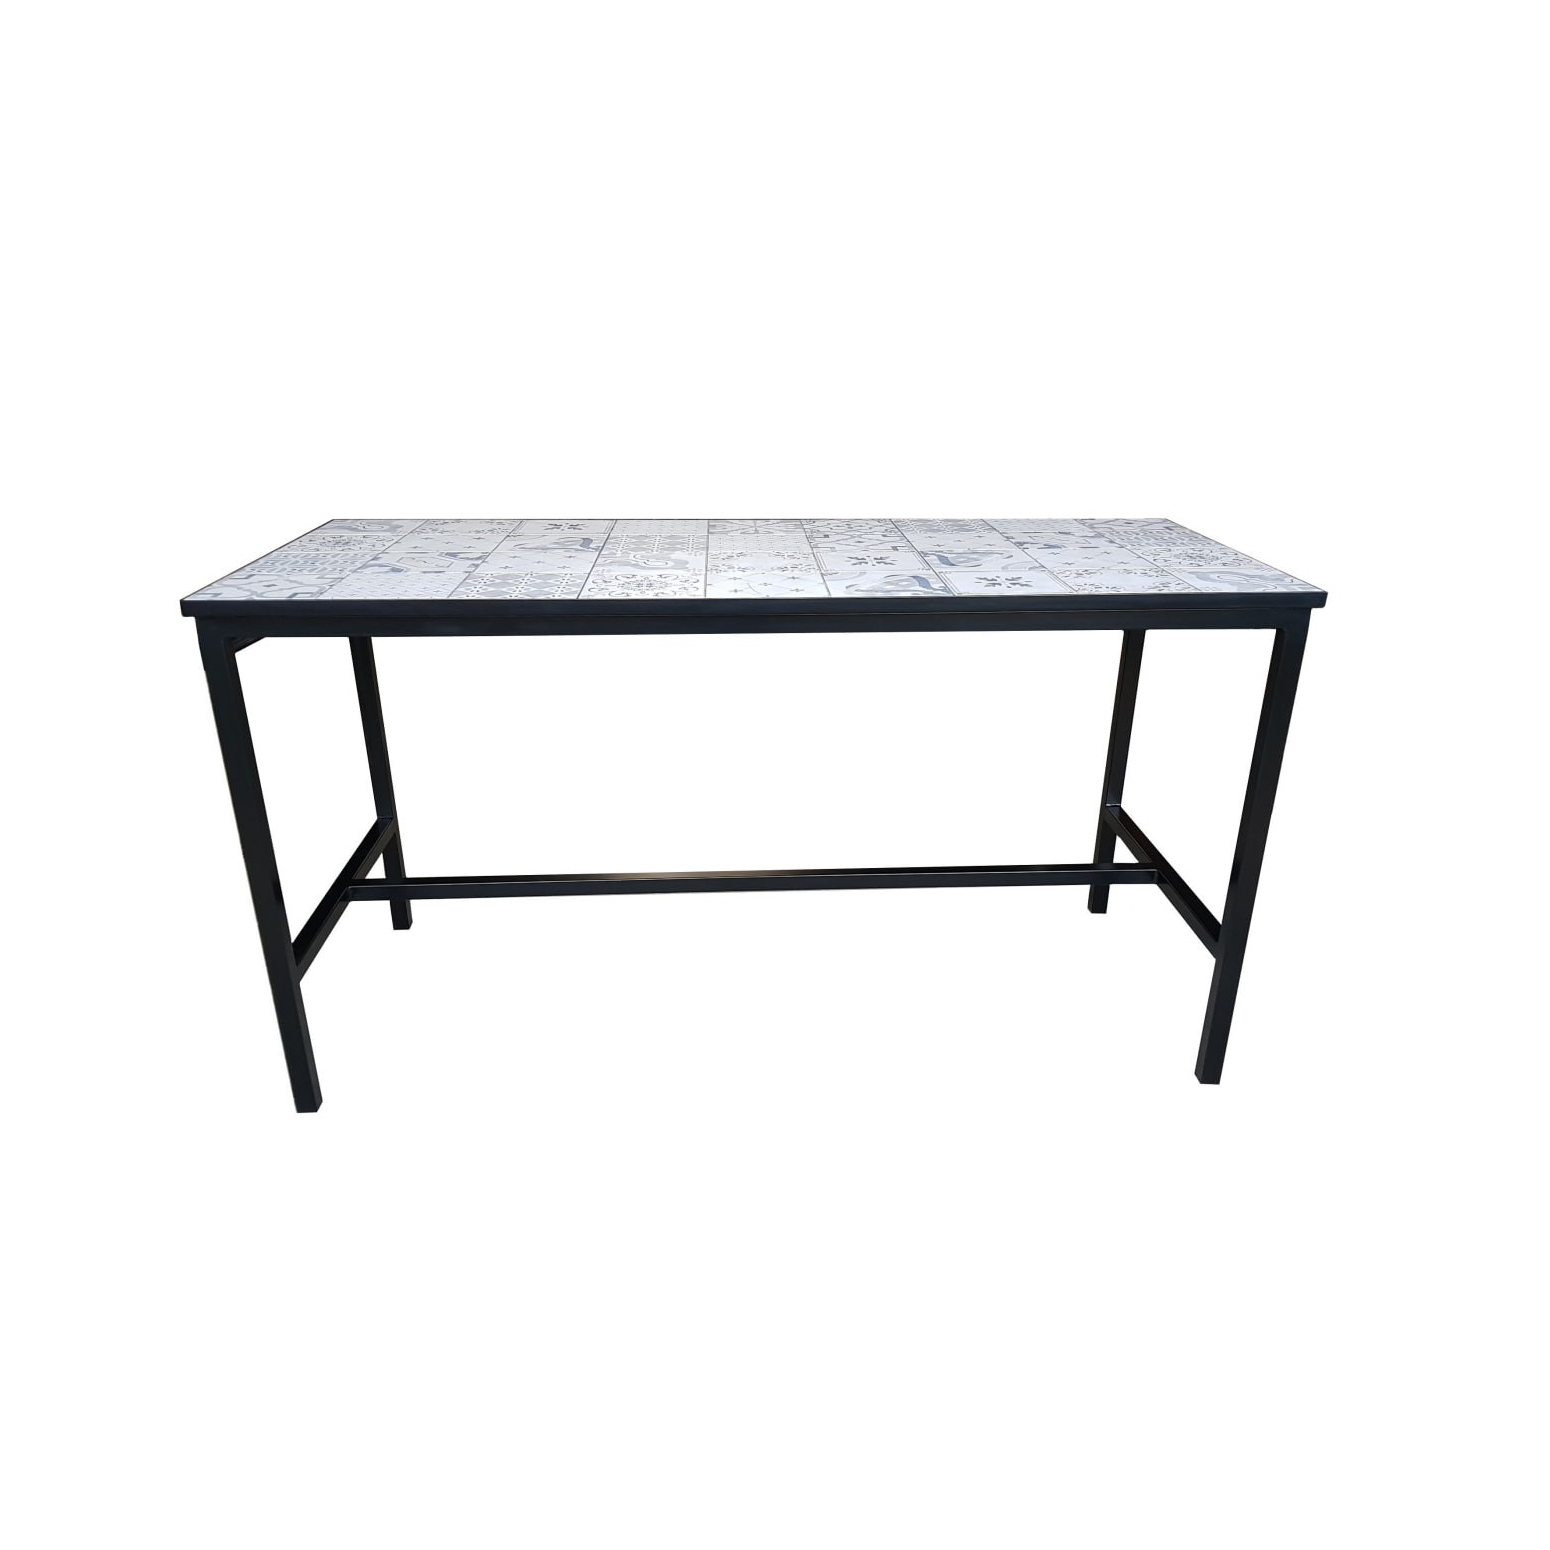 Alex P1 Table with H Support and Abstract Moroccan Tiles